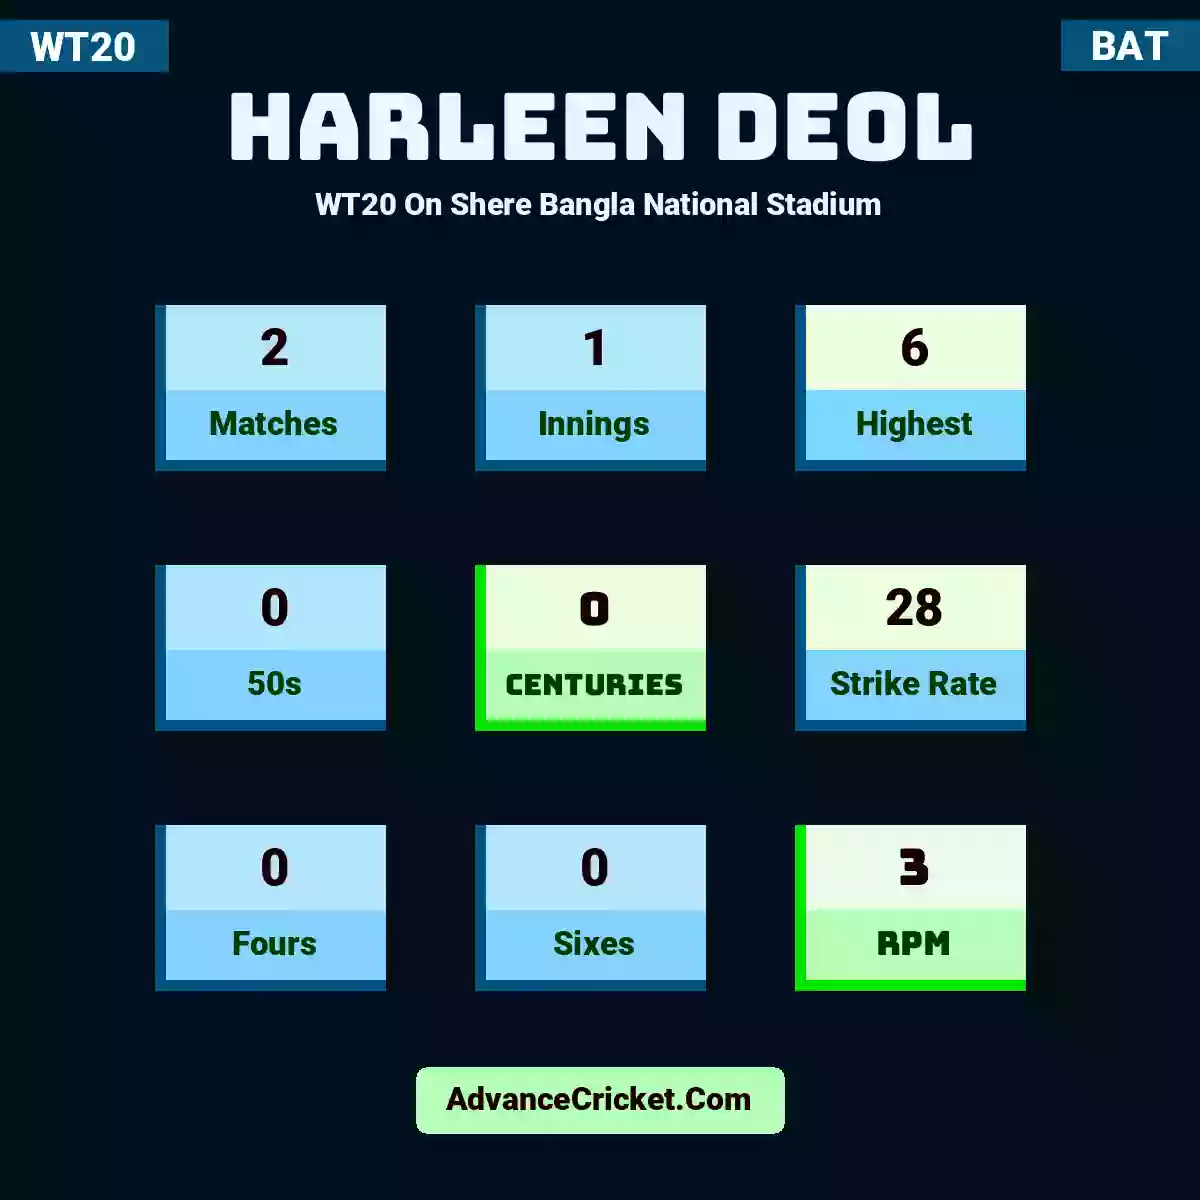 Harleen Deol WT20  On Shere Bangla National Stadium, Harleen Deol played 2 matches, scored 6 runs as highest, 0 half-centuries, and 0 centuries, with a strike rate of 28. H.Deol hit 0 fours and 0 sixes, with an RPM of 3.